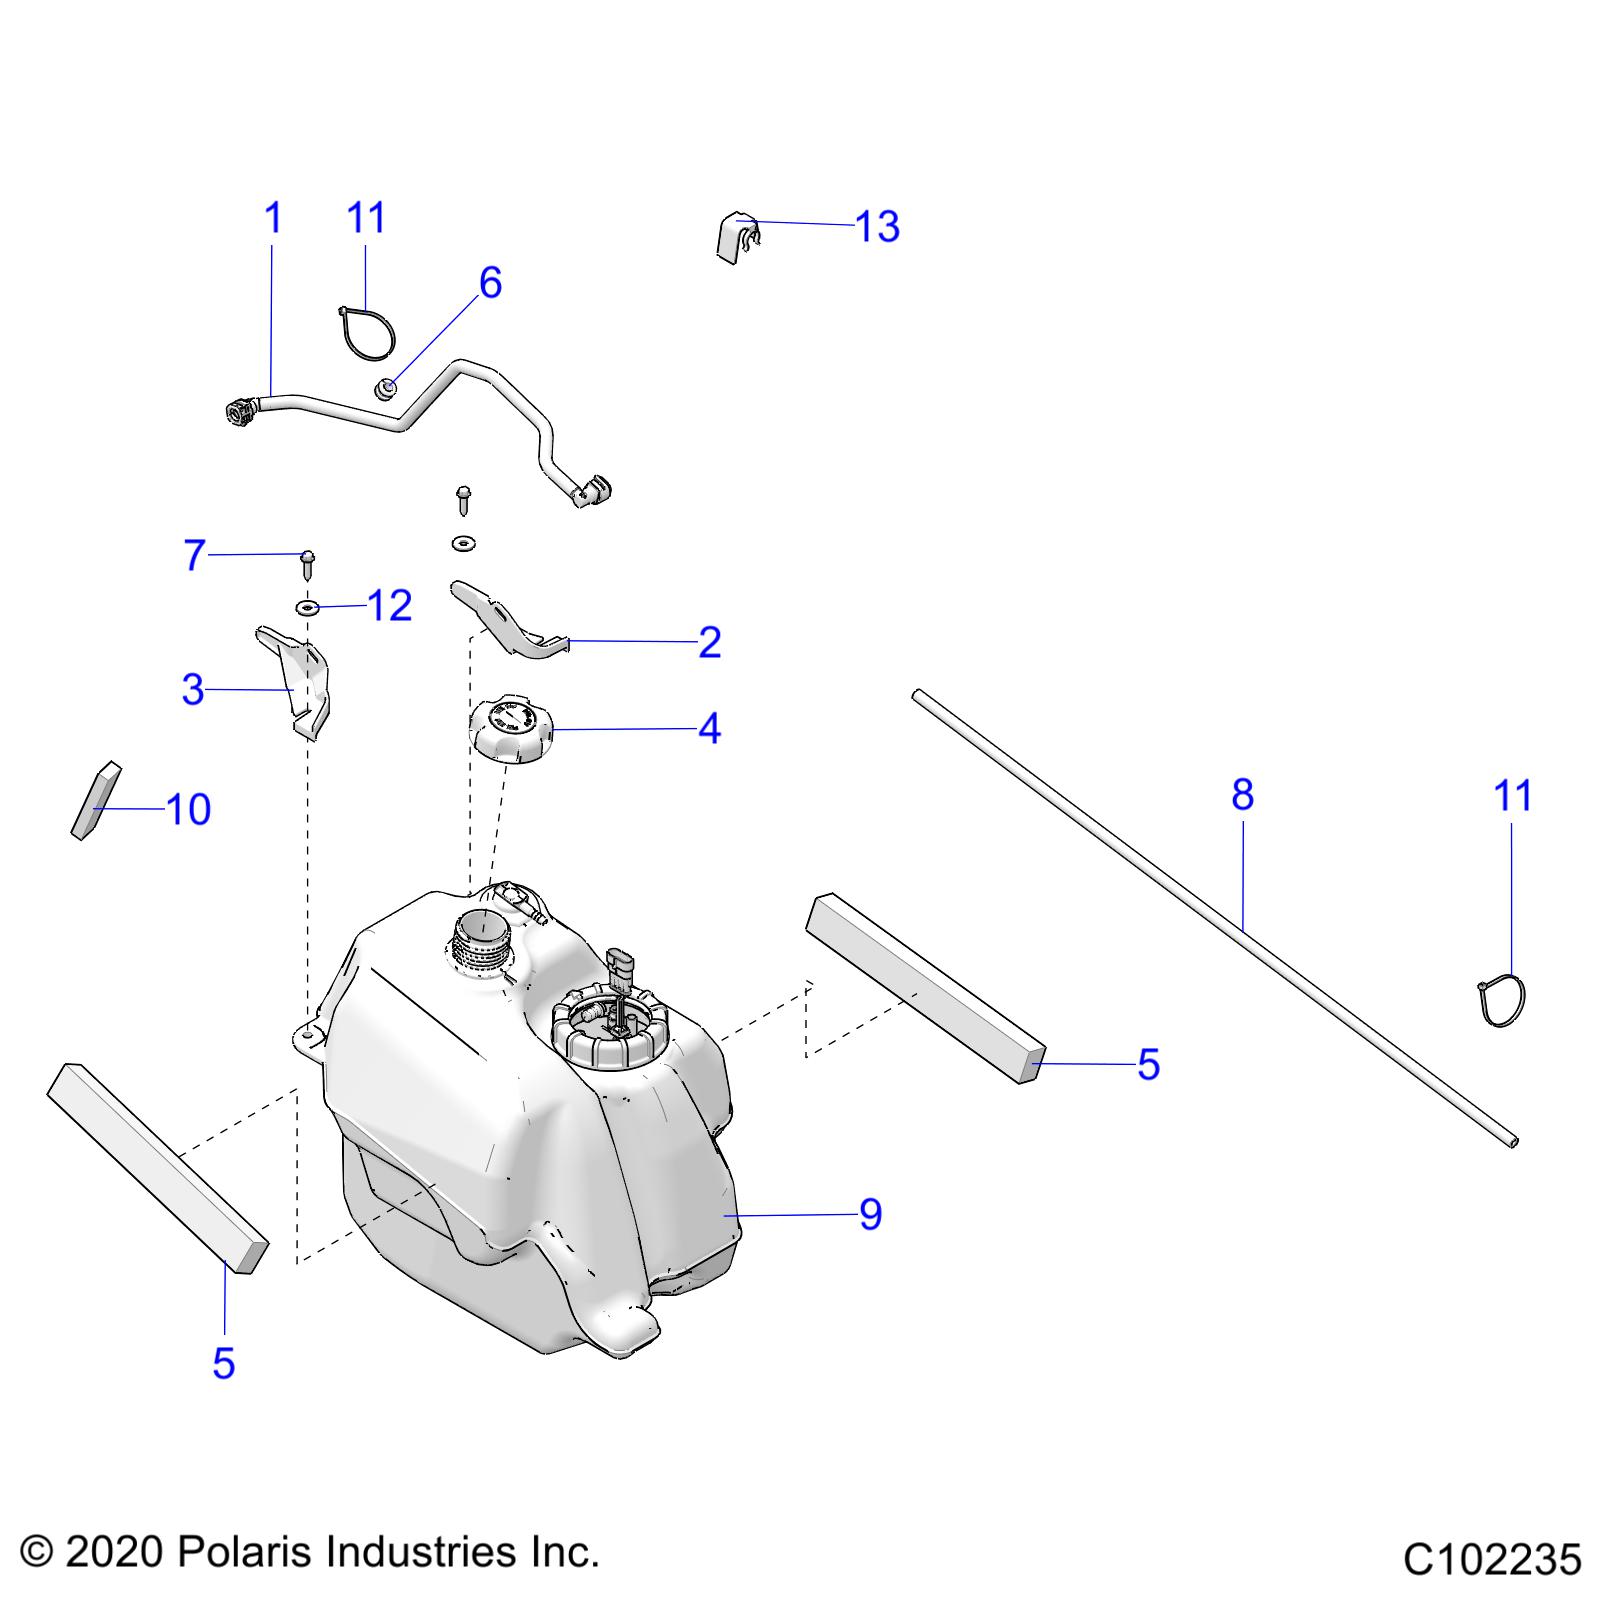 Part Number : 5454451 COVER-FUEL LINE CONNECTOR